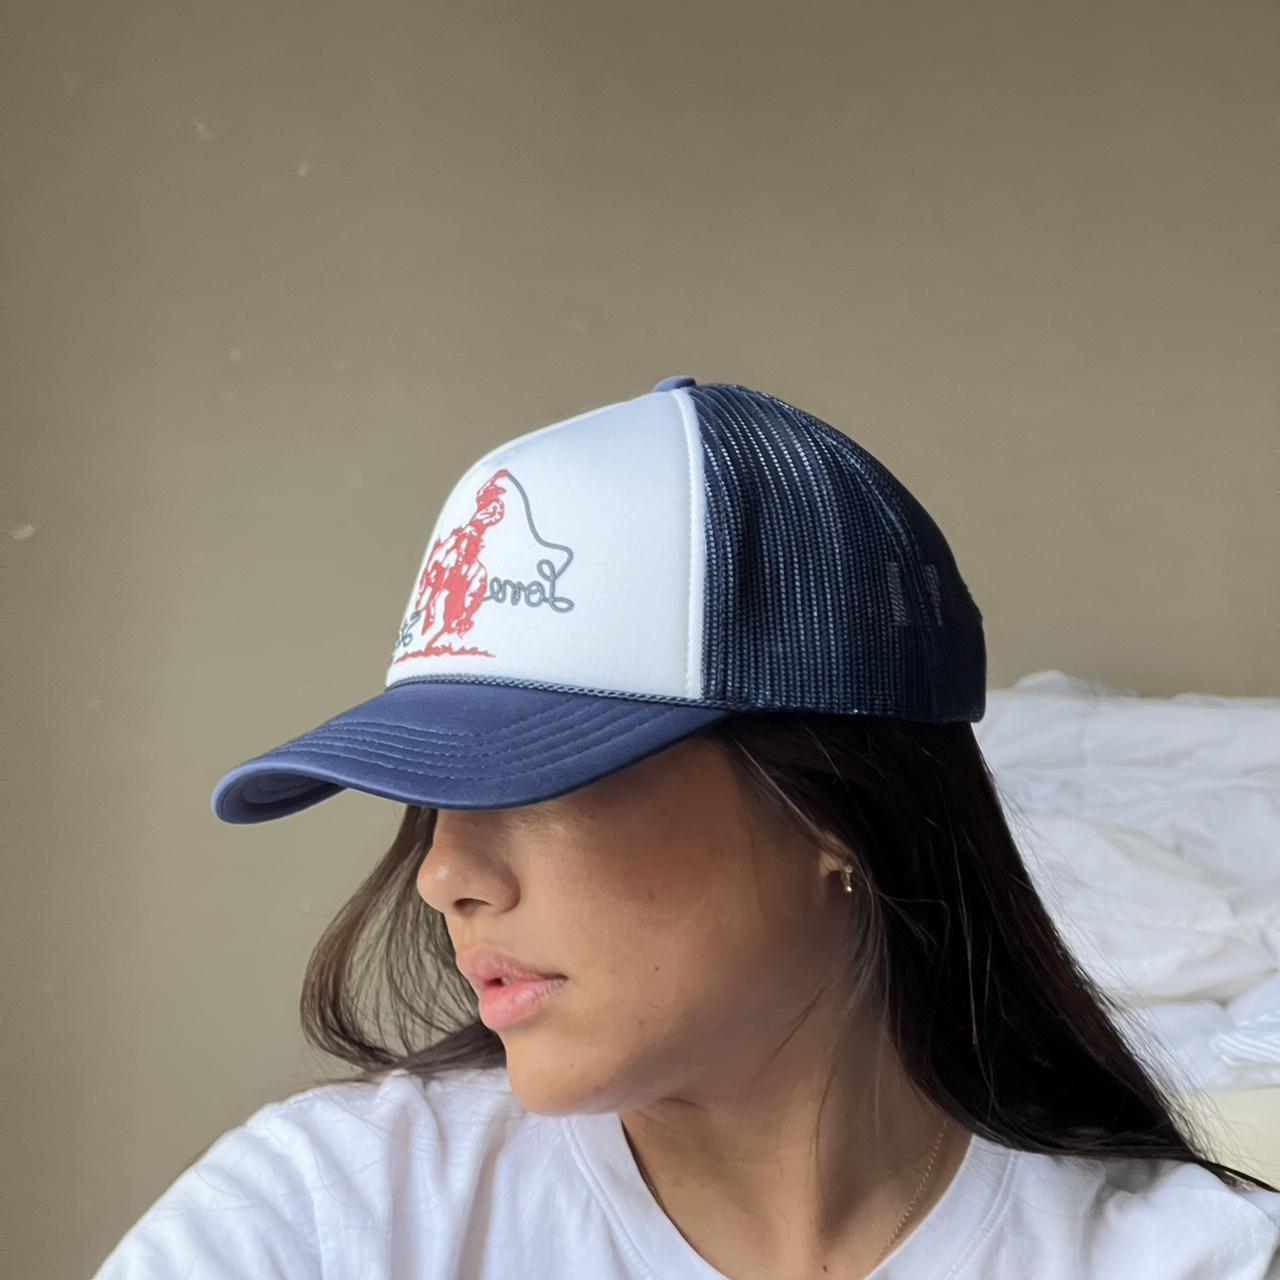 Free People Women's Navy and White Hat